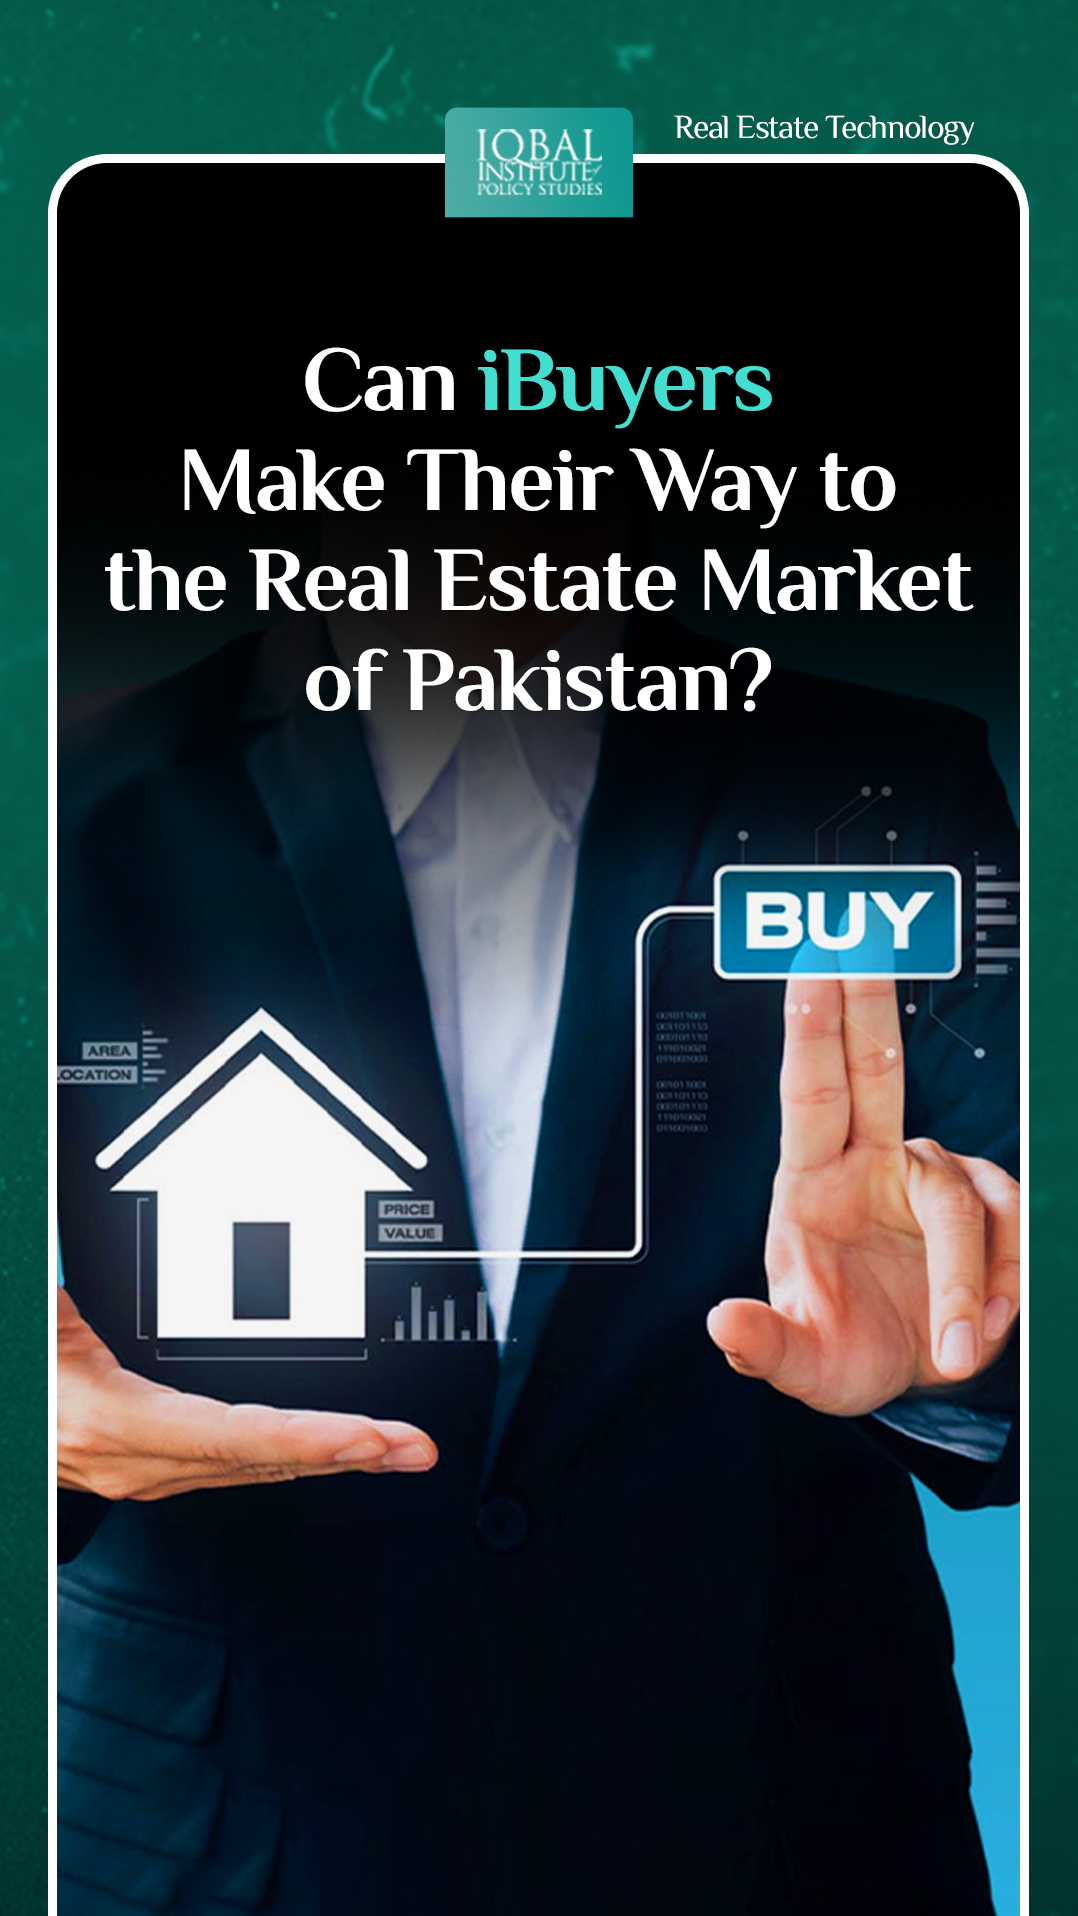 Can iBuyers make their way to the Real Estate Market of Pakistan?